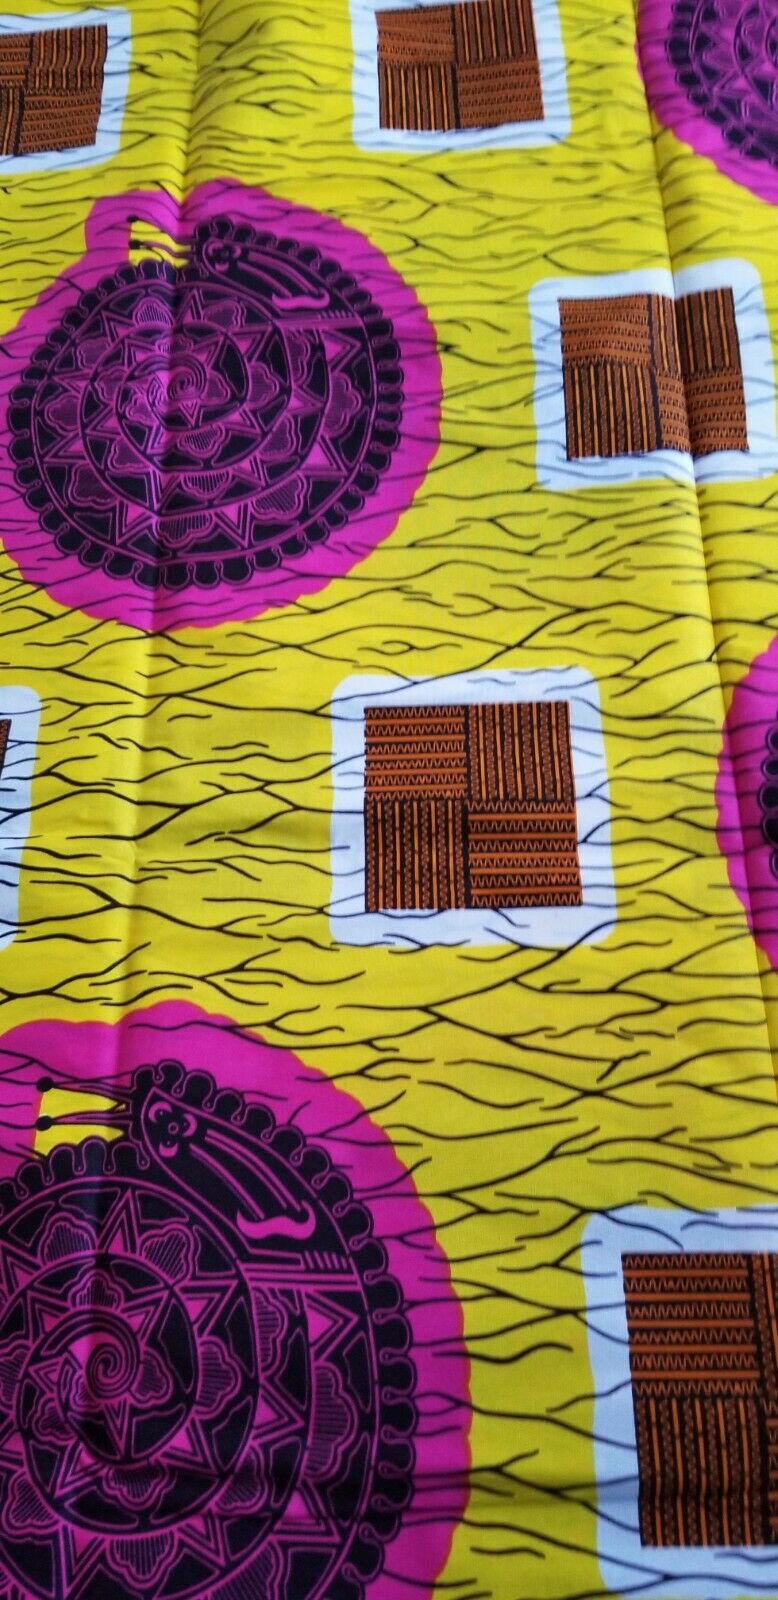 MULTICOLOR African Wax Print 100% Cotton Fabric 1 yard(44 in.) ~$6.60